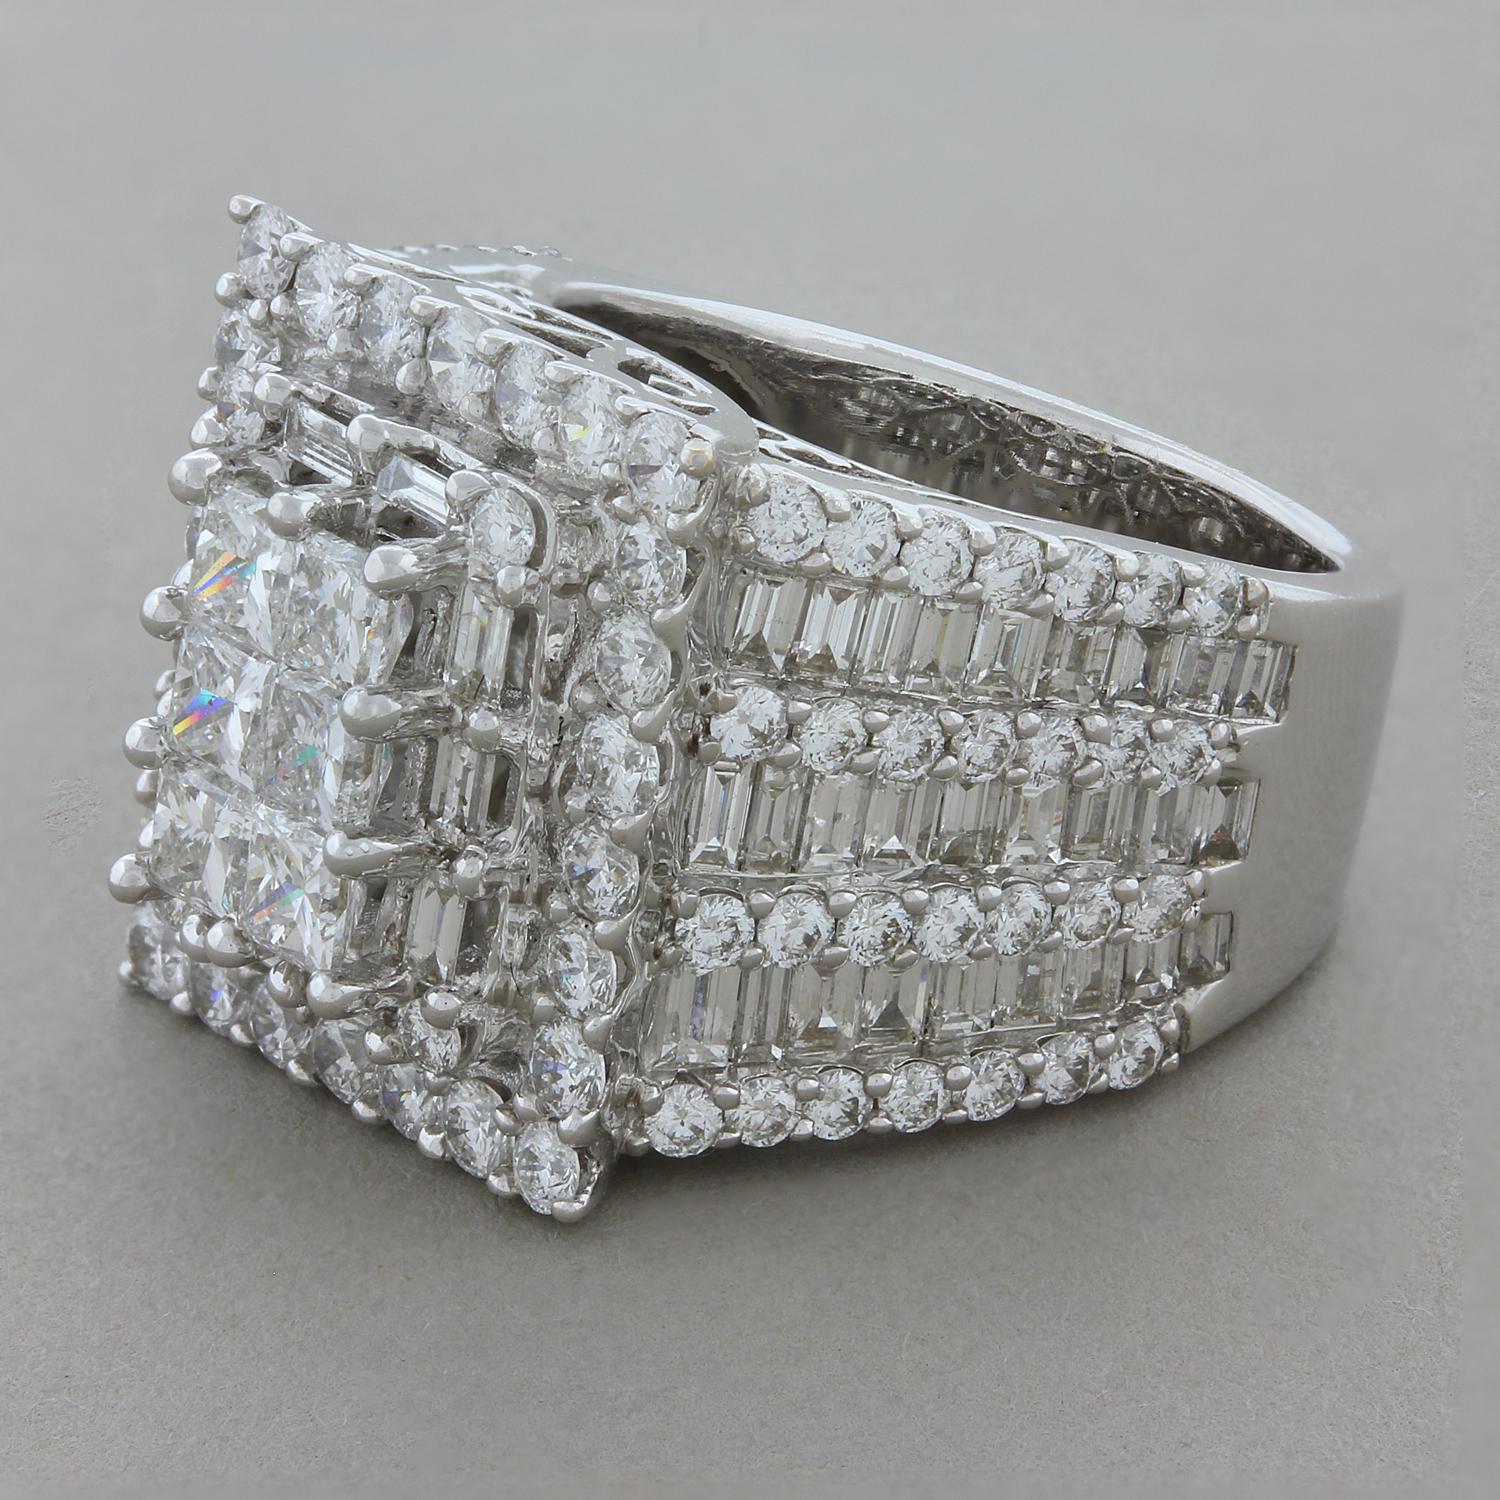 A magnificent three-sided ring featuring 6.30 carats of diamonds. The flat top has a bed of princess cut diamonds with a halo of baguette cut diamonds followed by a double halo of round cut diamonds. The two sides have three rows of baguette cut